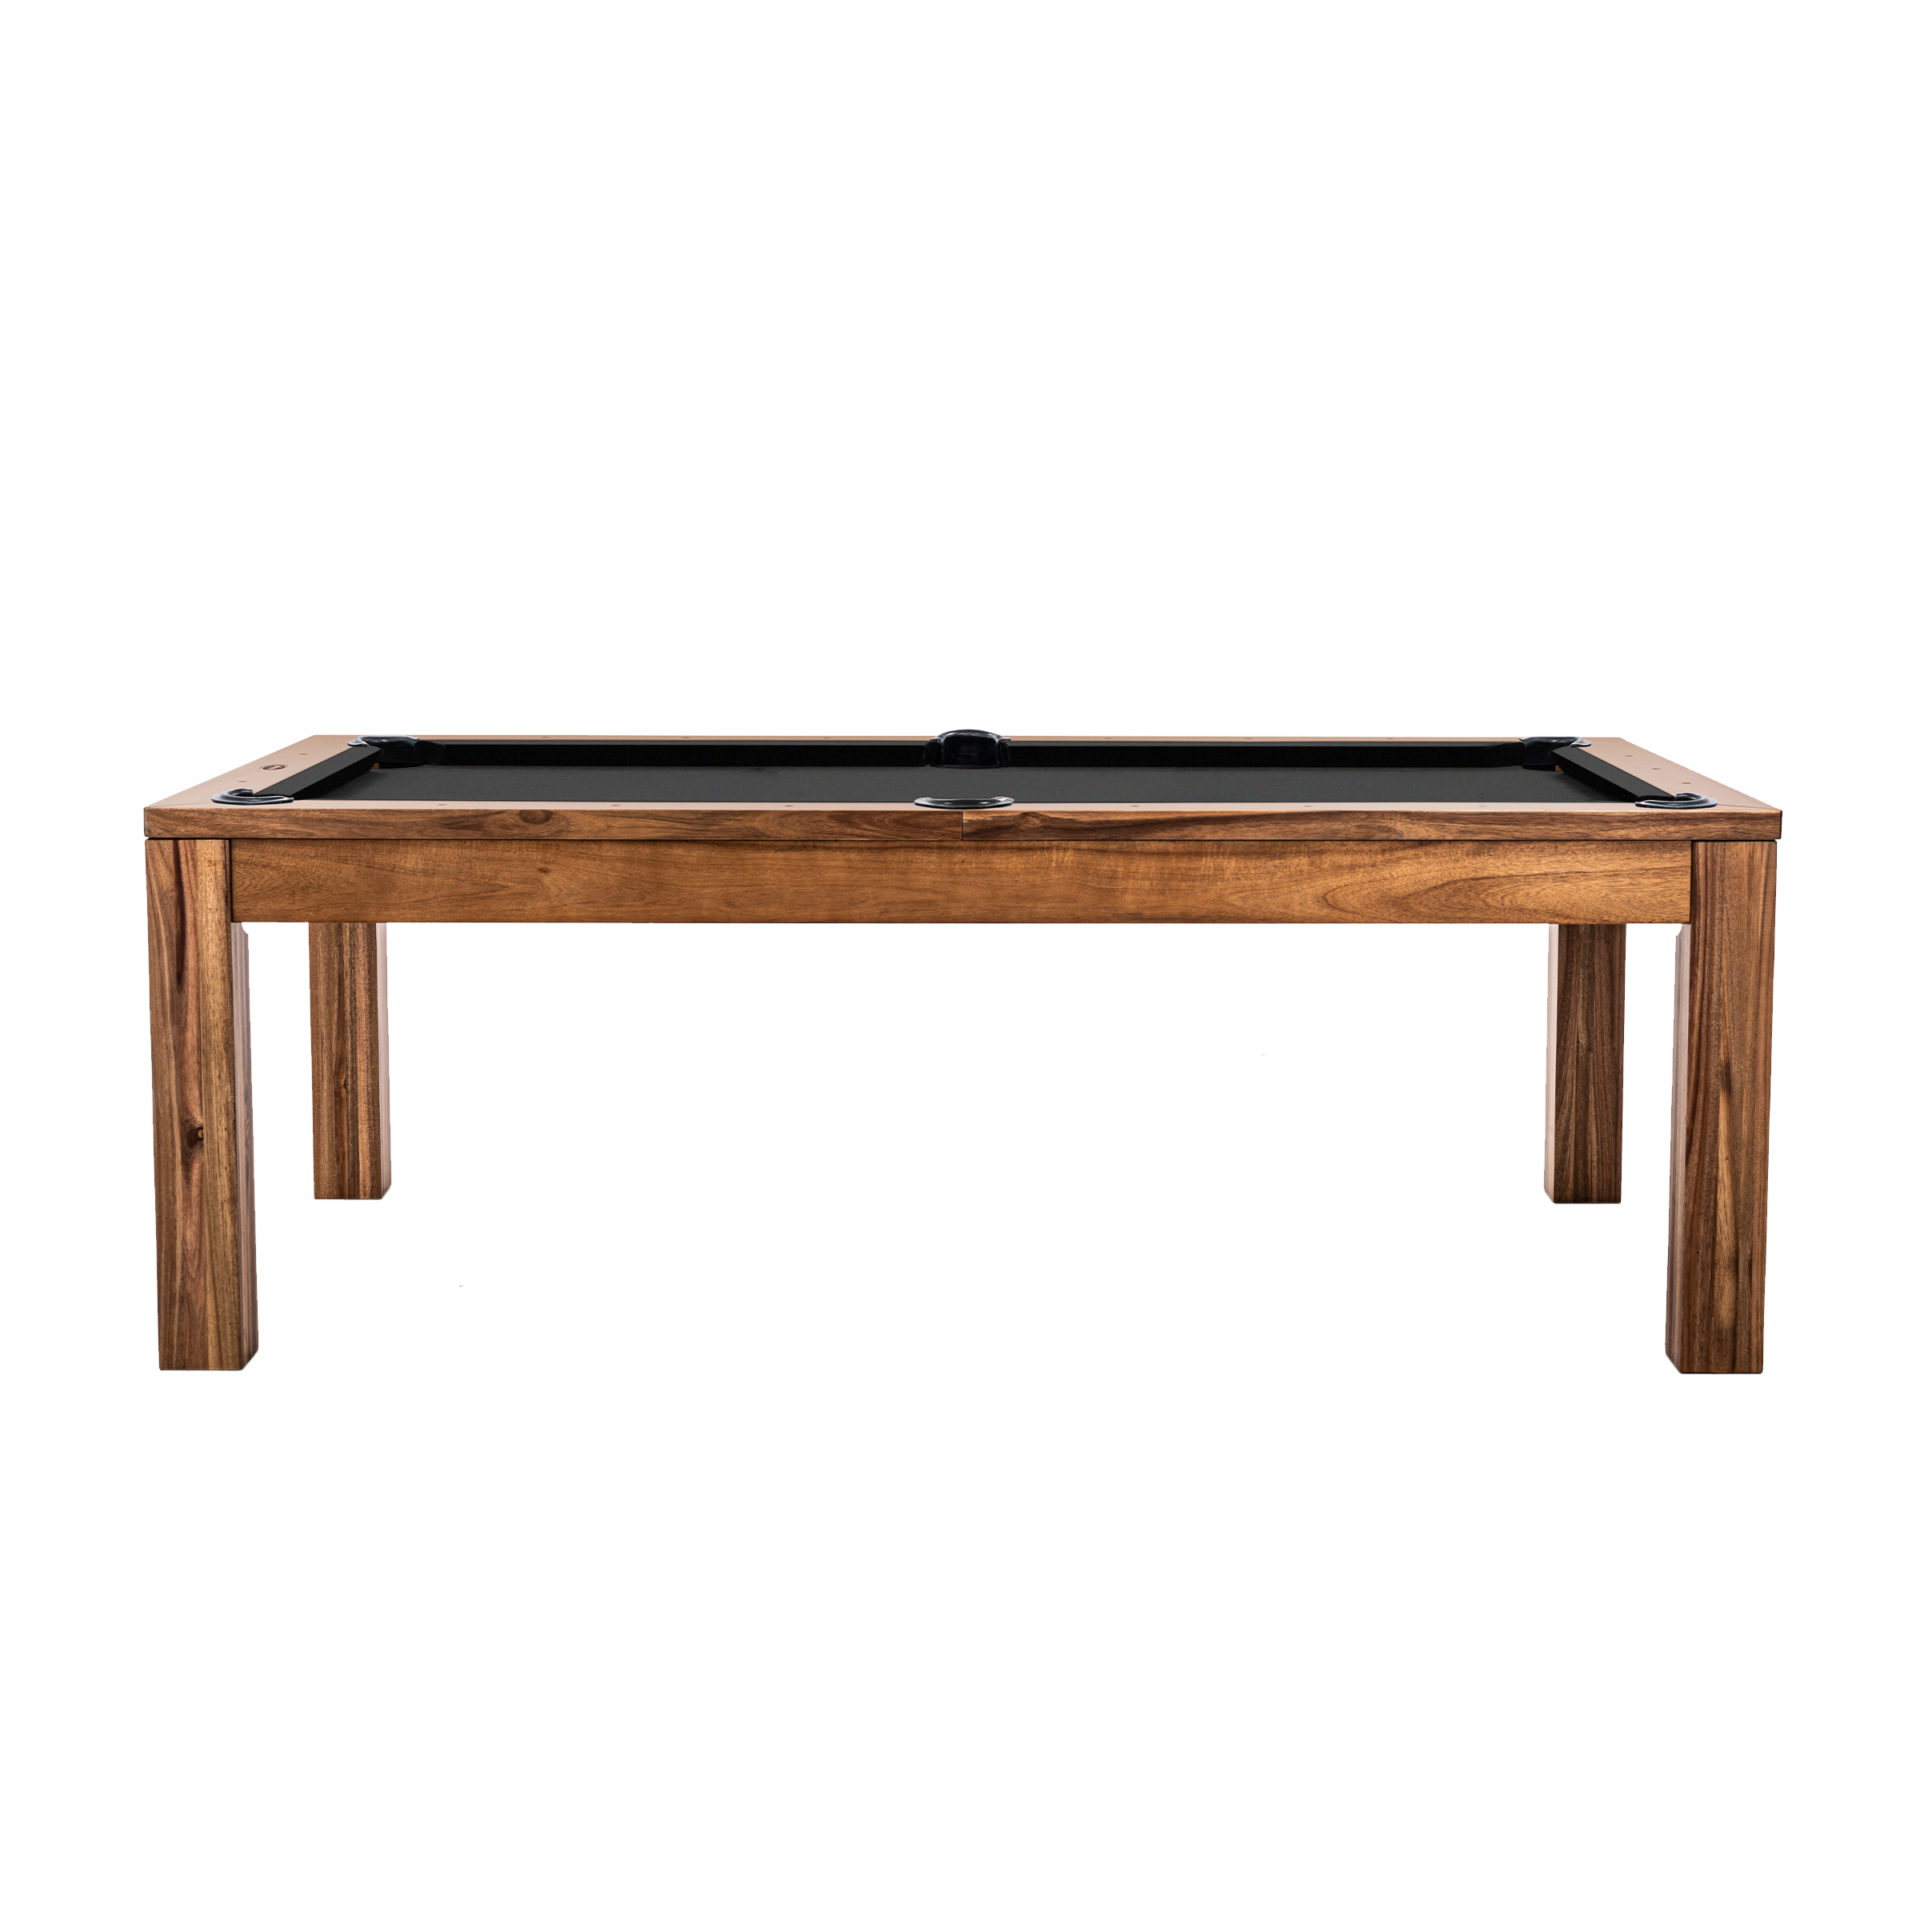 Penelope – Dining Top Included – Acacia | Imagine That Pool Tables